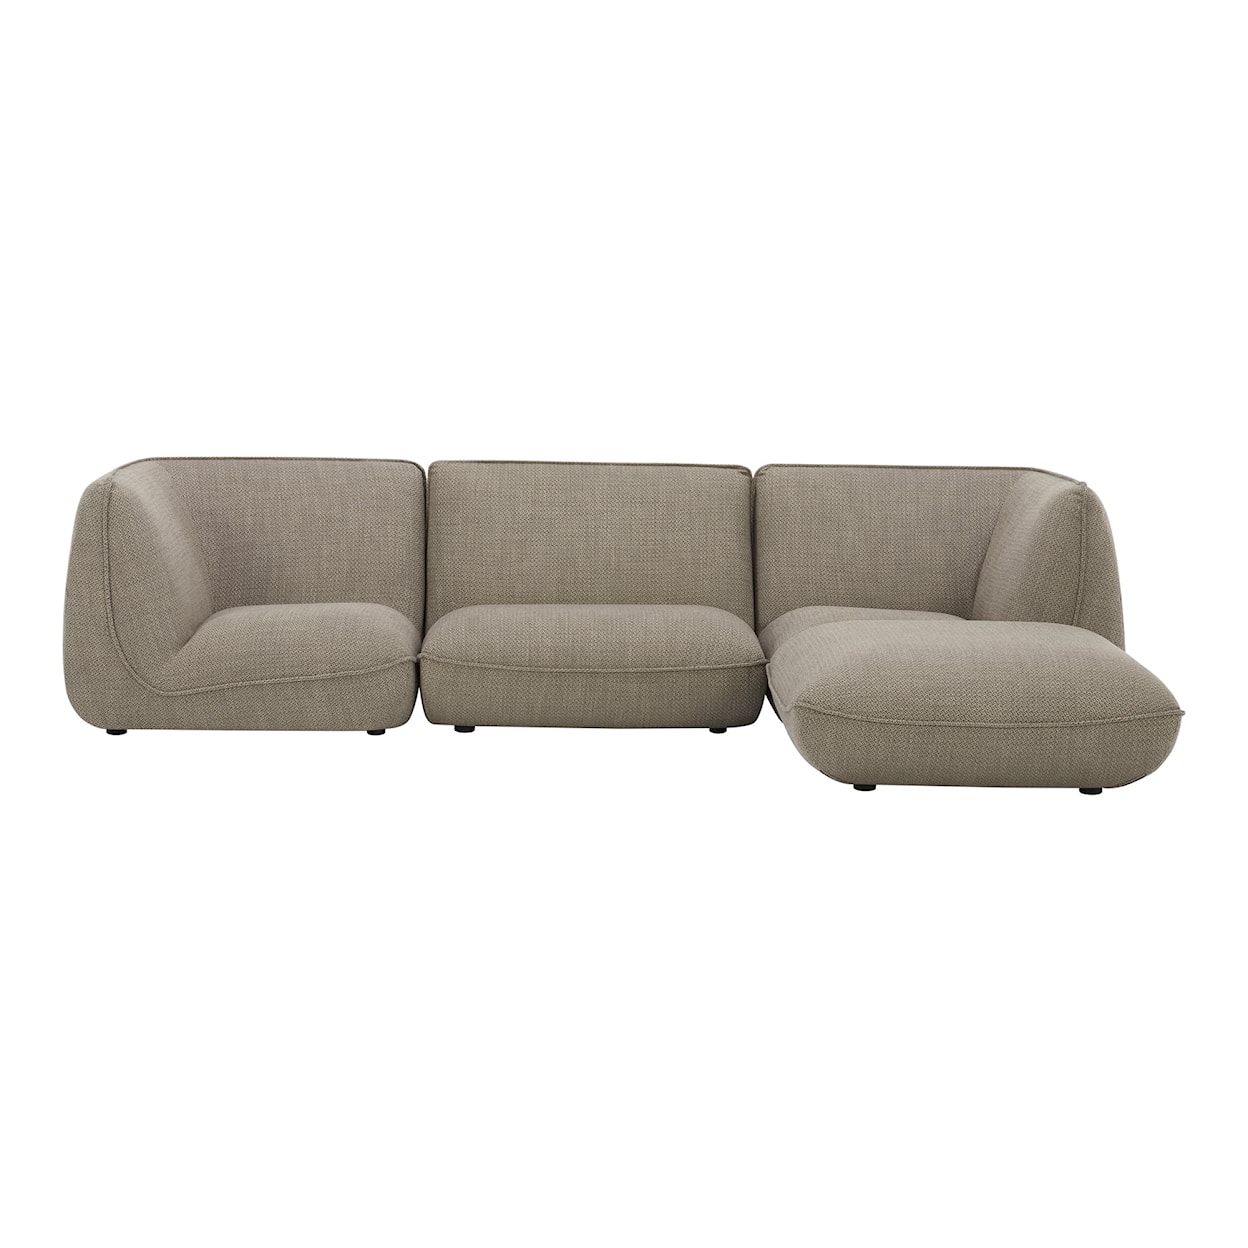 Moe's Home Collection Zeppelin 4-Piece Speckled Pumice Modular Sectional 